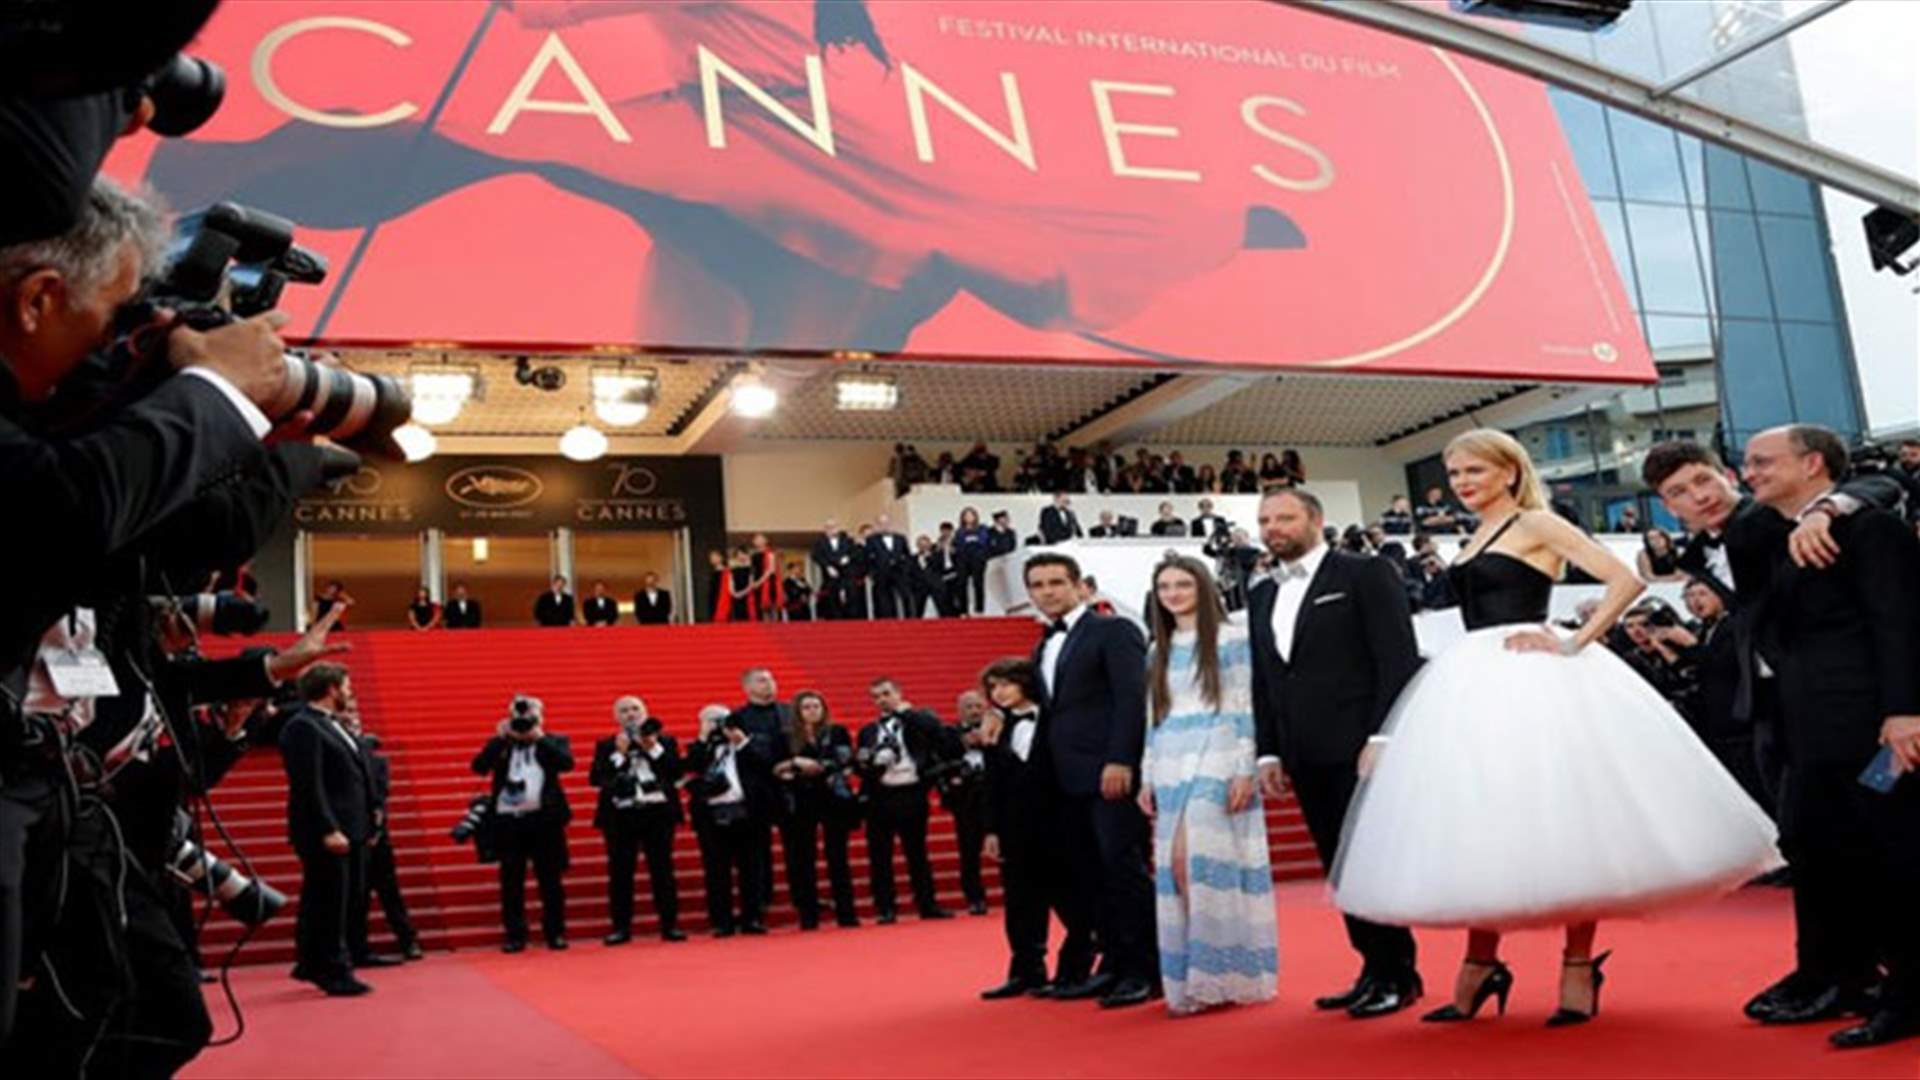 No Netflix, No Selfies At Cannes Film Festival This Year